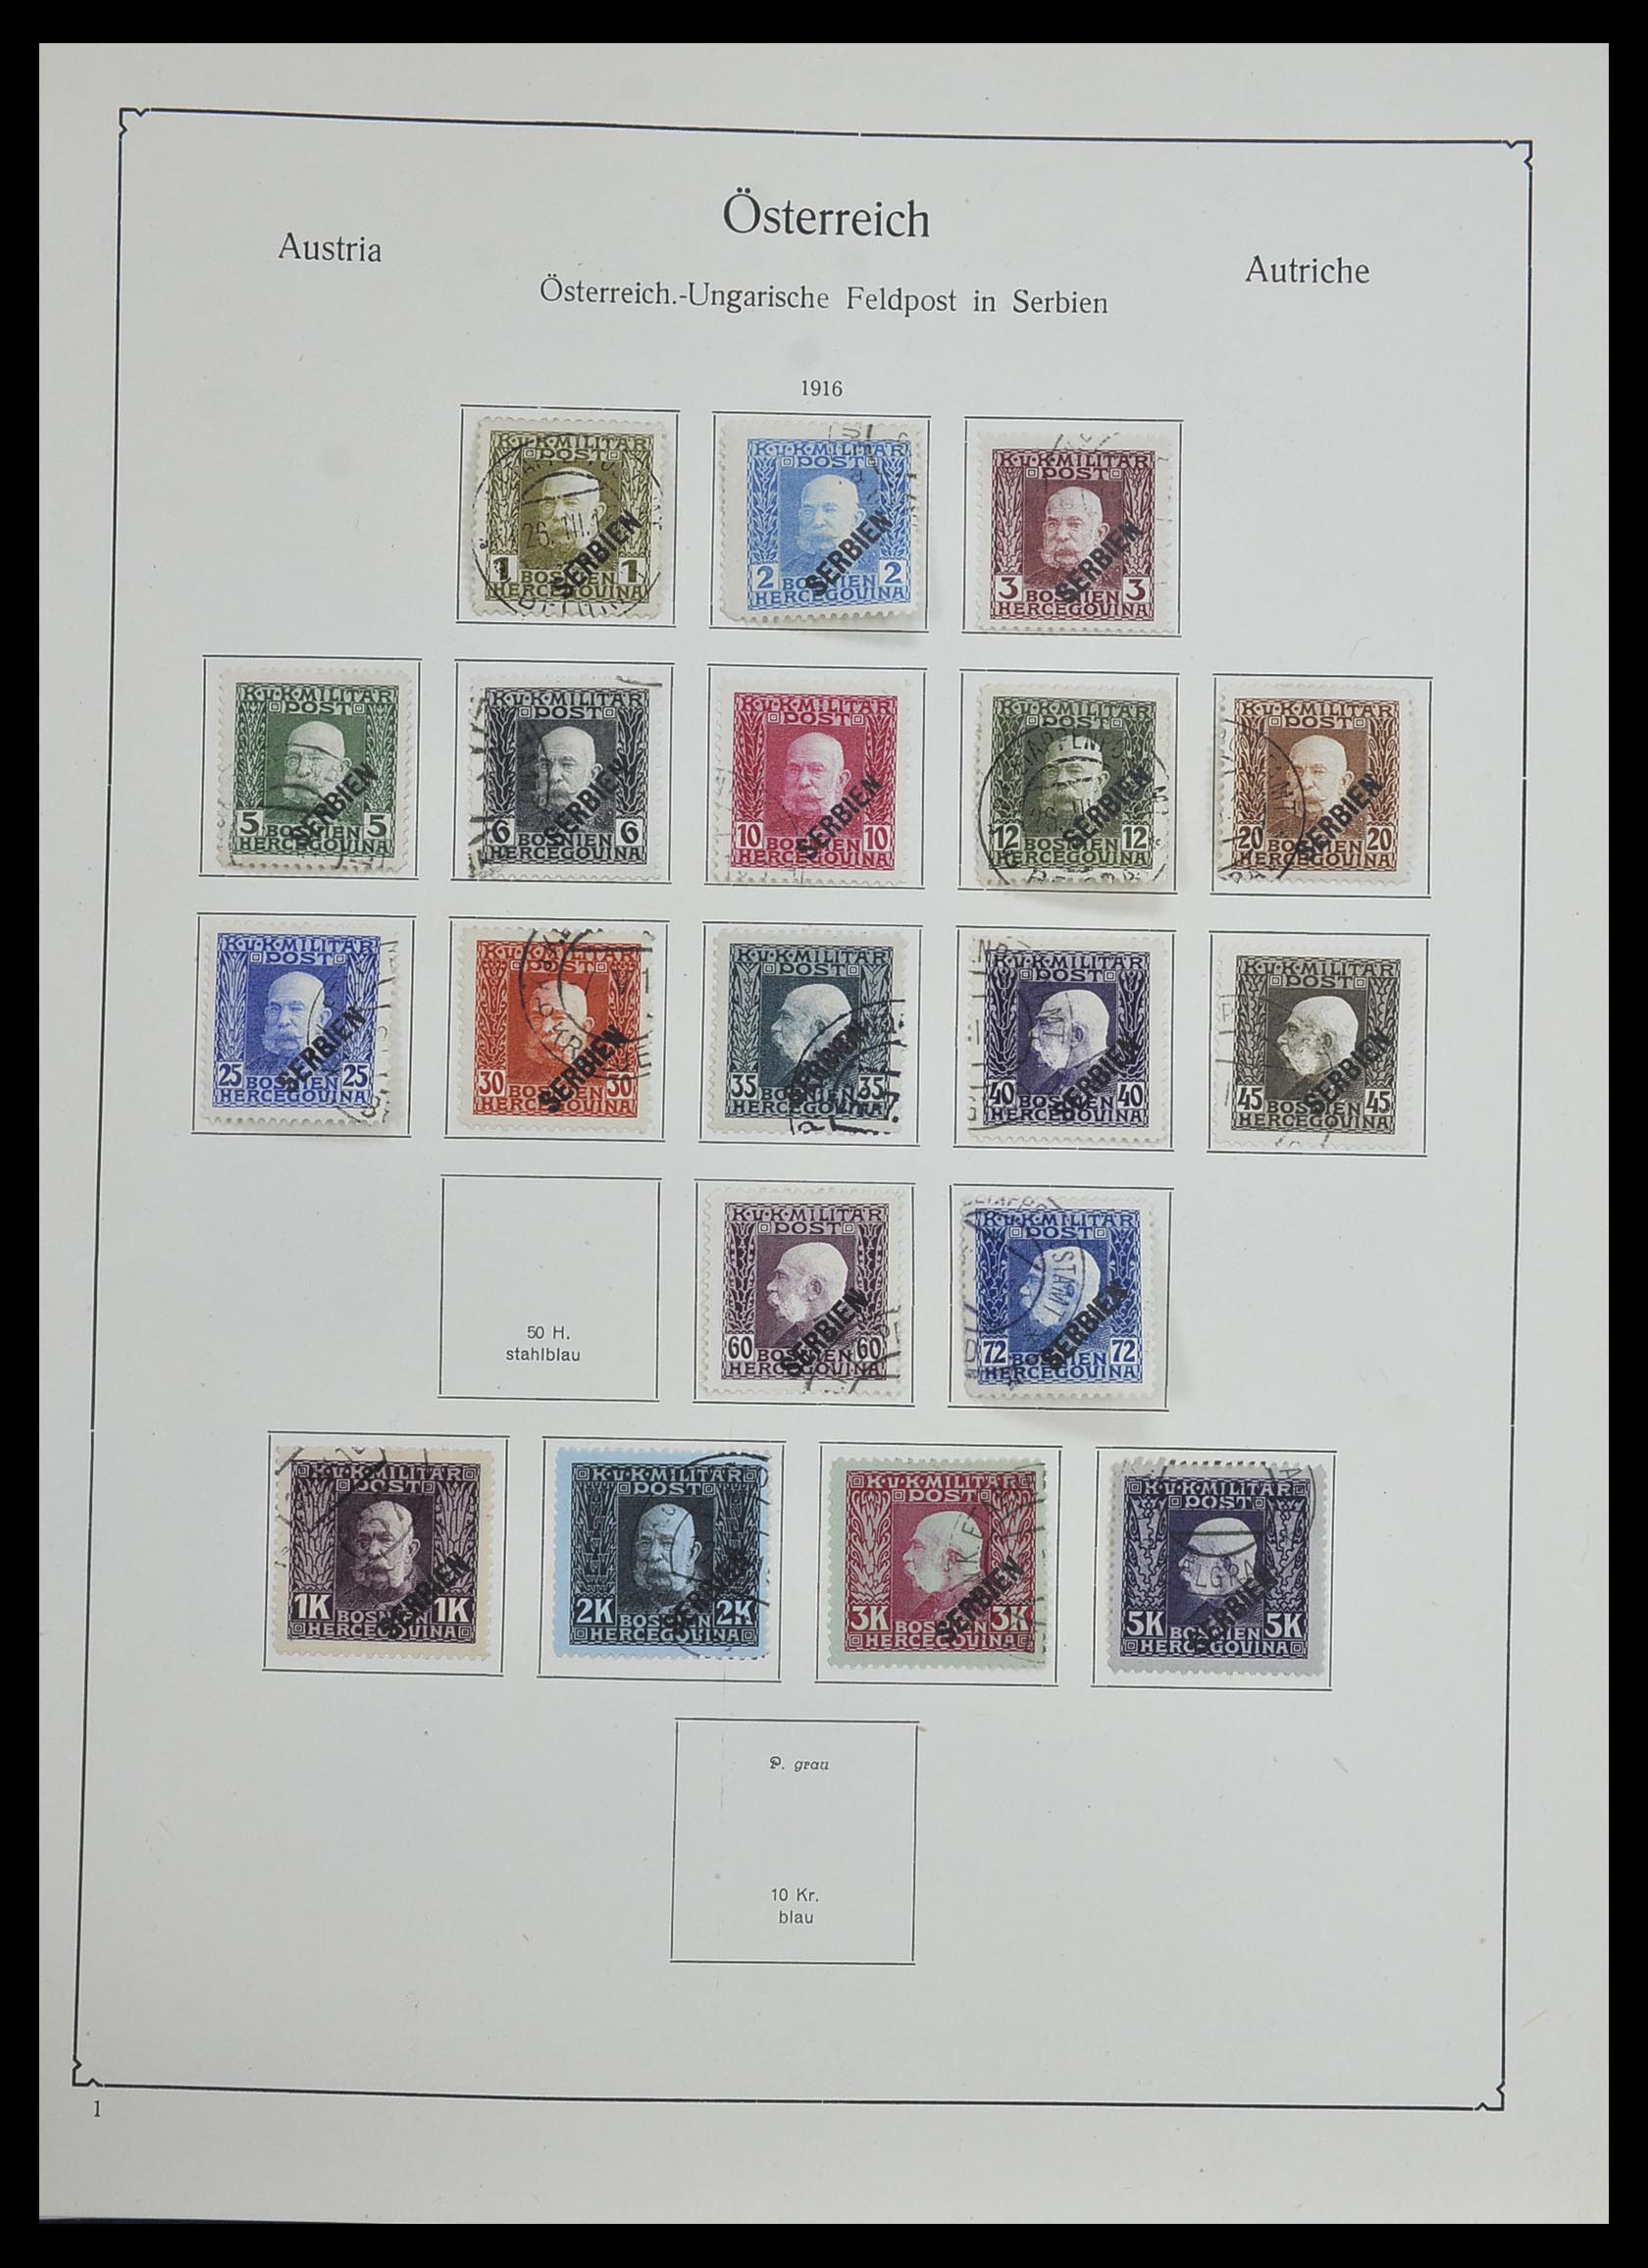 33594 021 - Stamp collection 33594 Austria and territories 1850-1918.